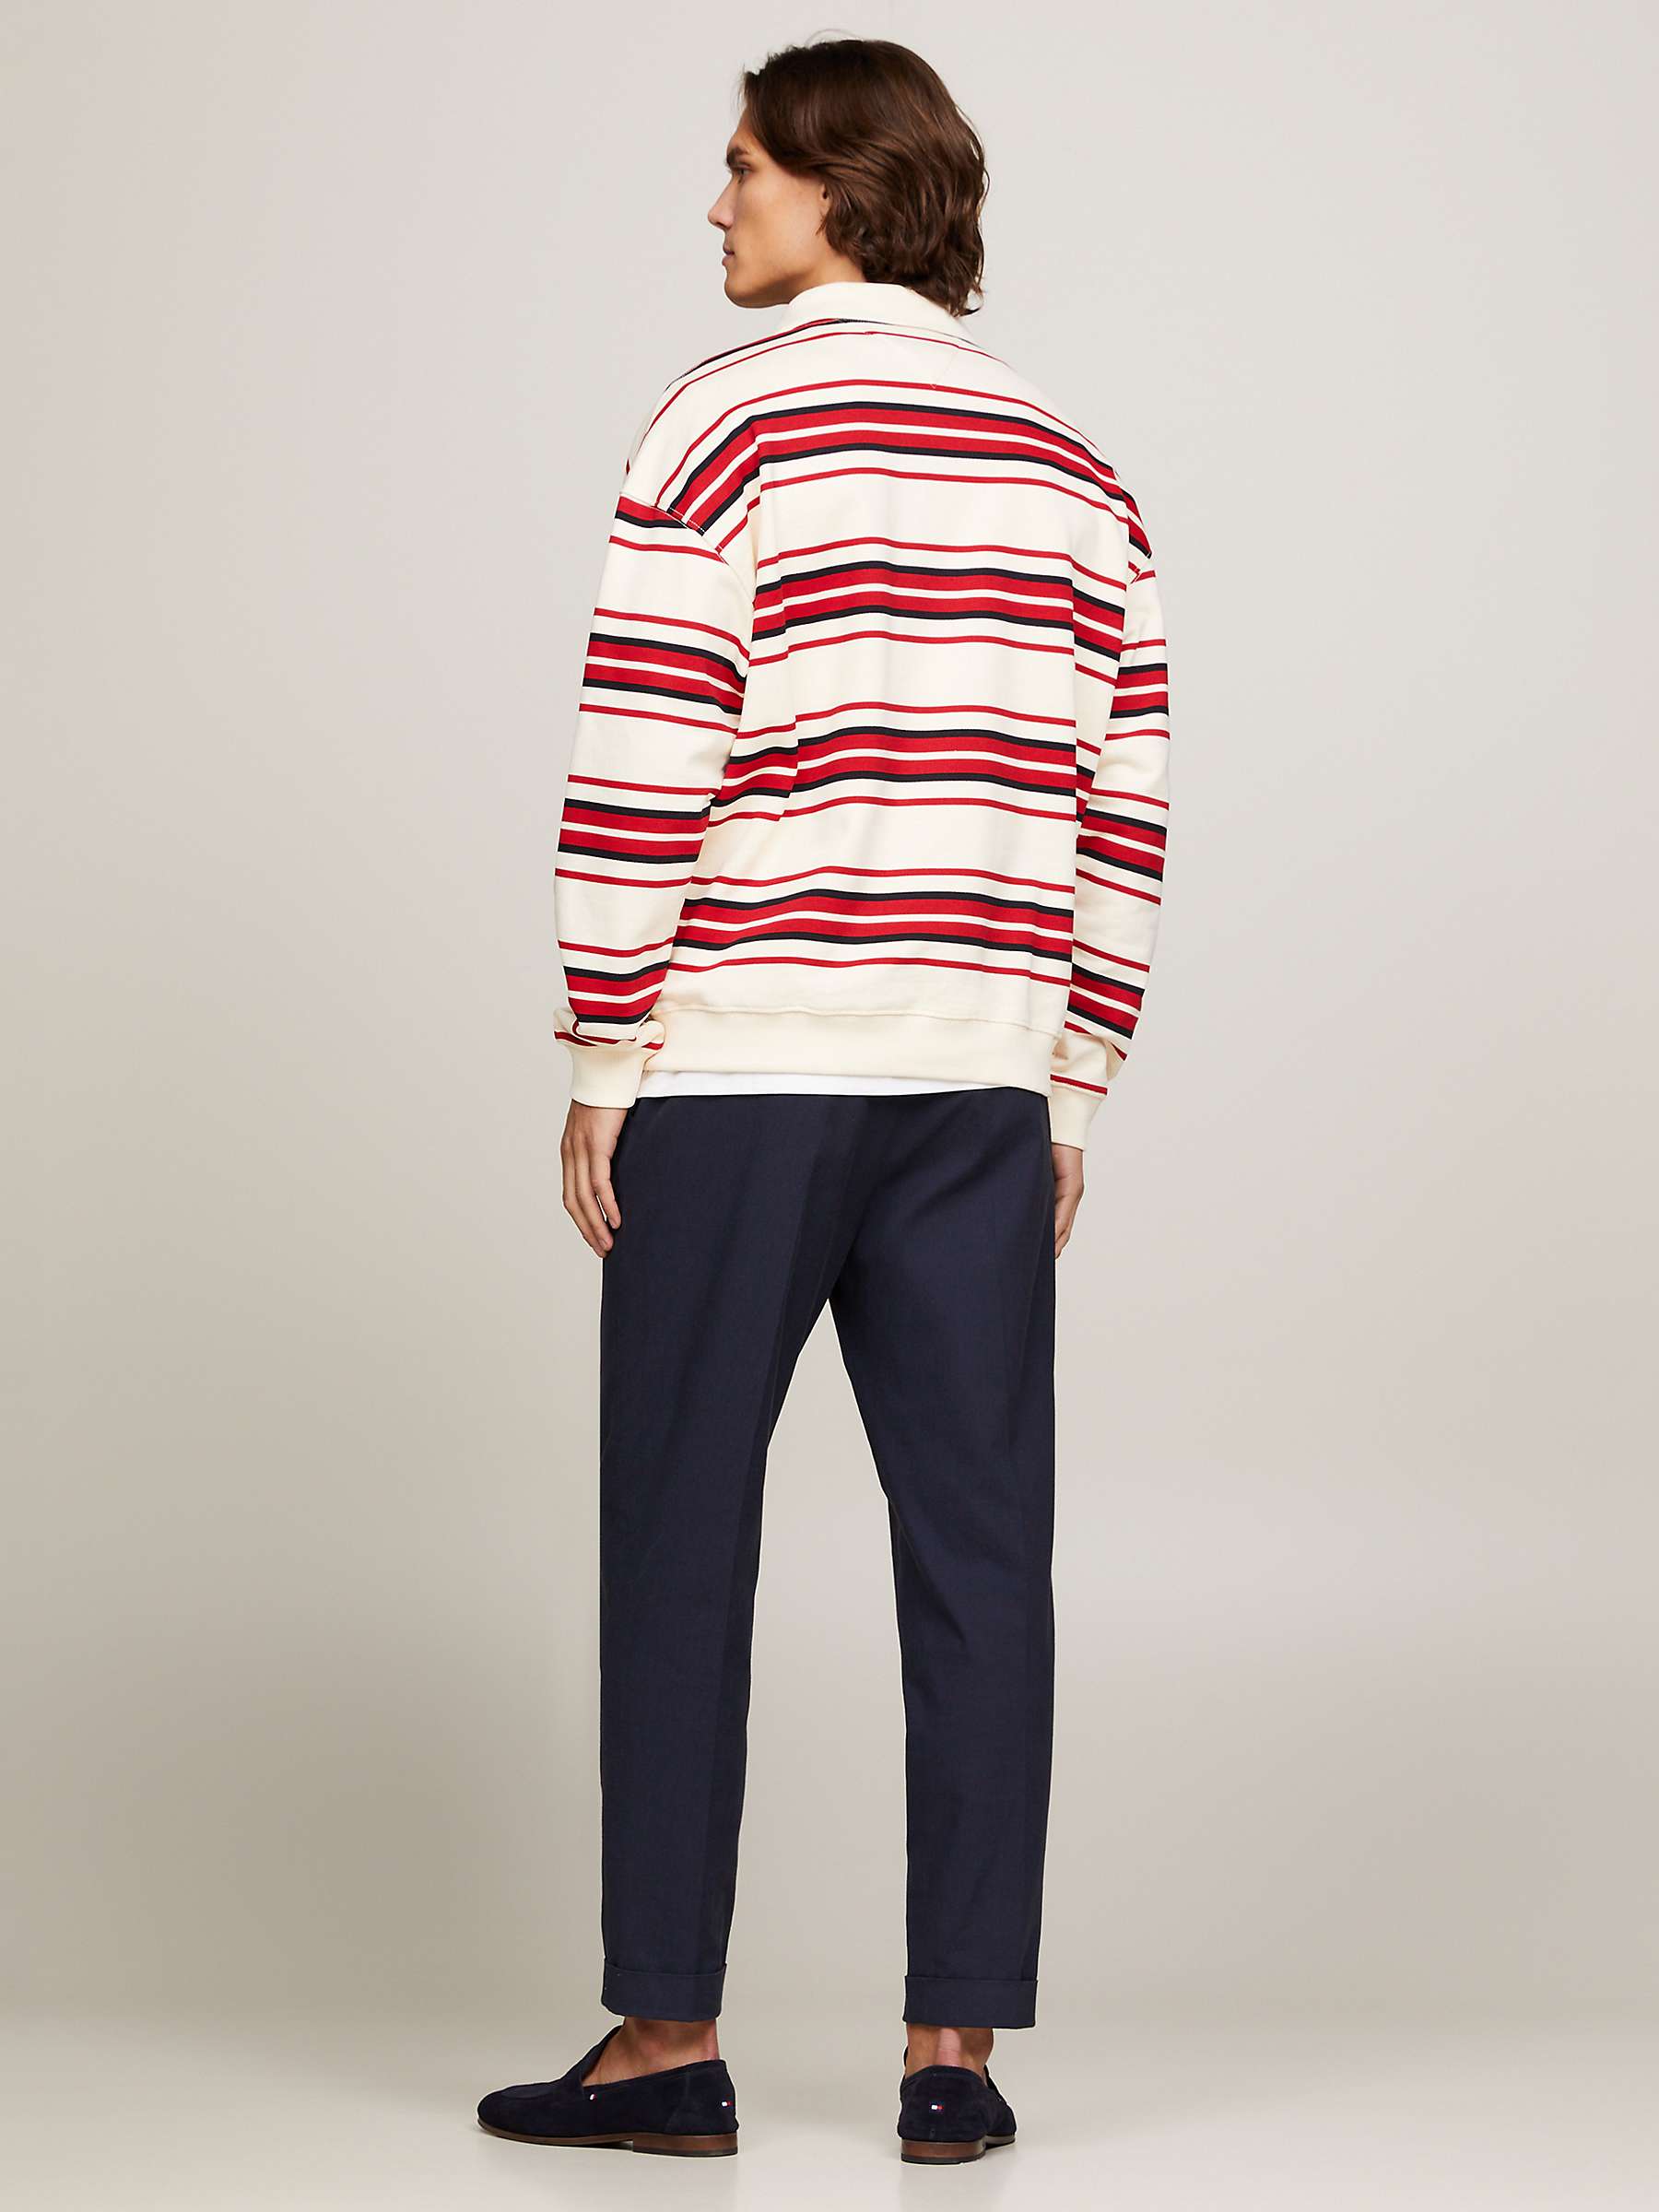 Buy Tommy Hilfiger Striped Rugby Top, Calico/Multi Online at johnlewis.com